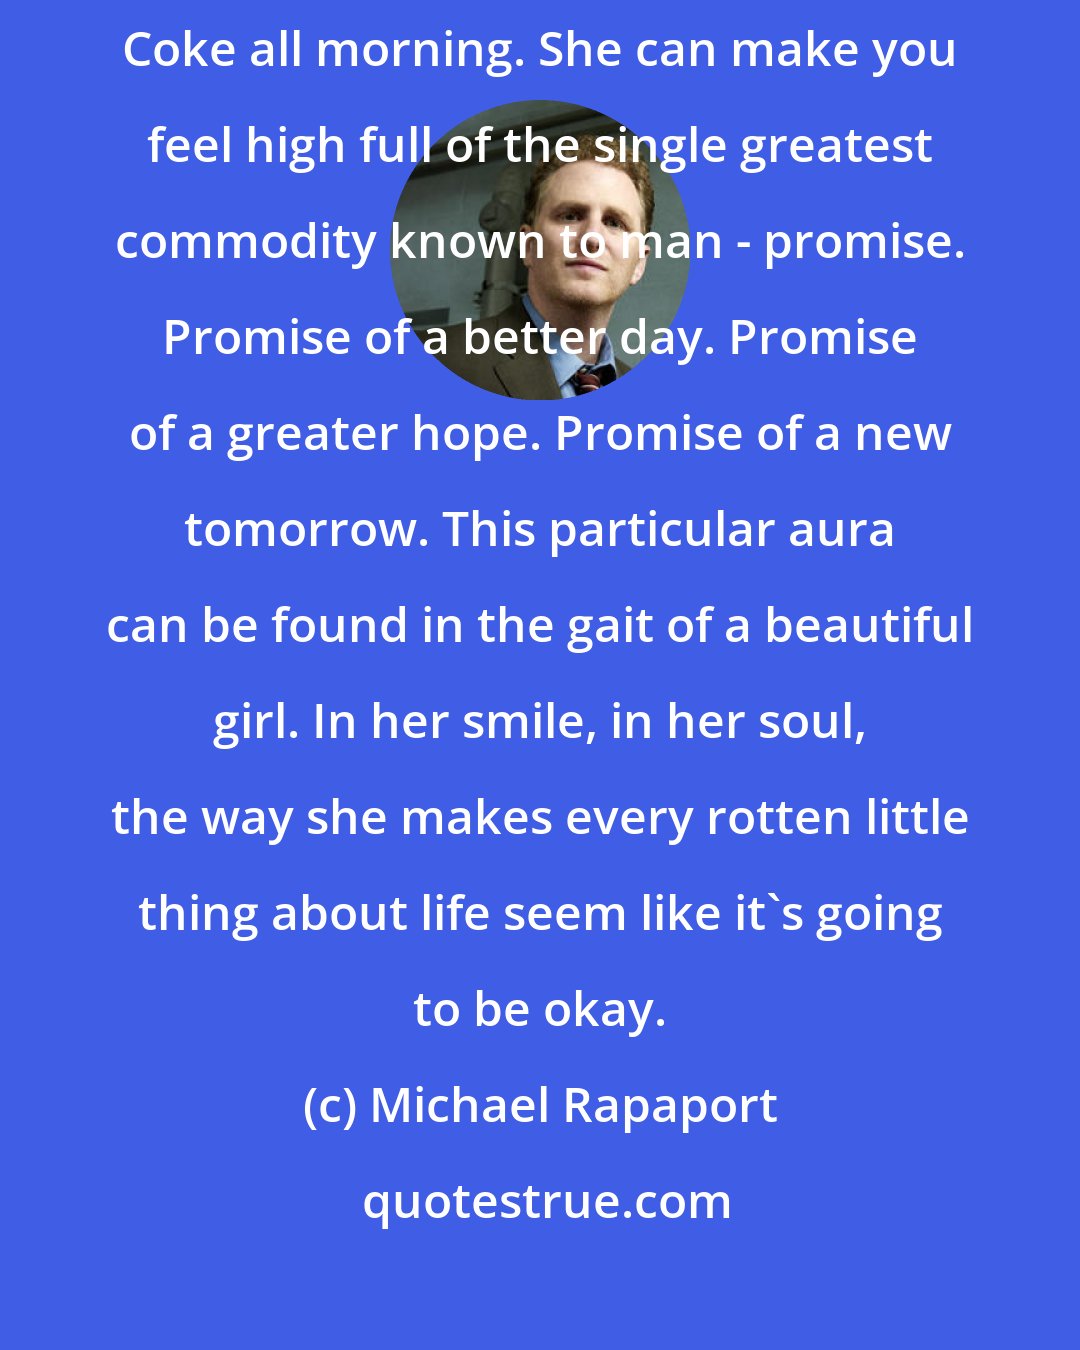 Michael Rapaport: A beautiful girl can make you dizzy, like you've been drinking Jack and Coke all morning. She can make you feel high full of the single greatest commodity known to man - promise. Promise of a better day. Promise of a greater hope. Promise of a new tomorrow. This particular aura can be found in the gait of a beautiful girl. In her smile, in her soul, the way she makes every rotten little thing about life seem like it's going to be okay.